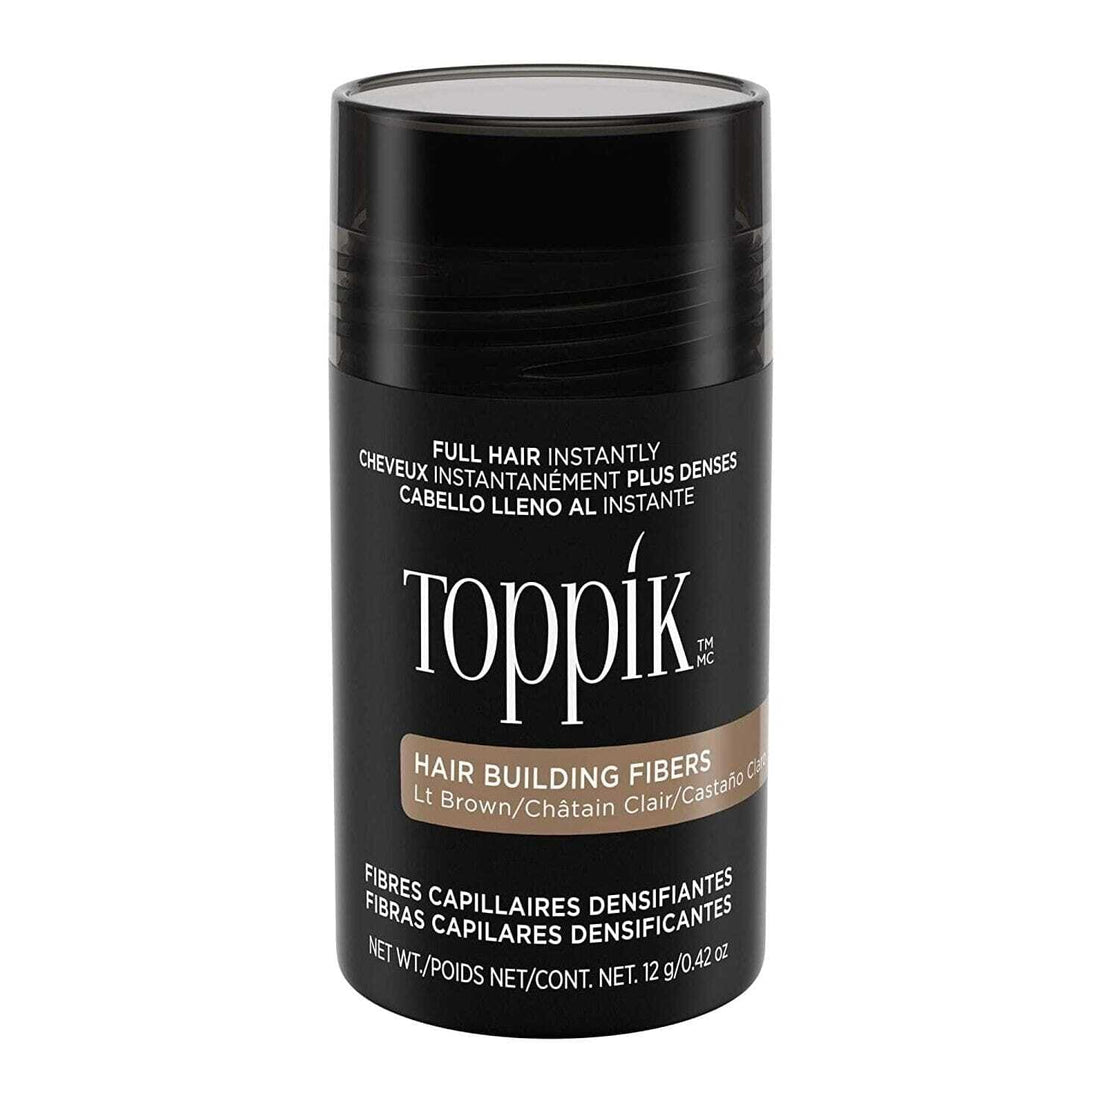 Toppik Hair Building Fibers - LIGHT BROWN Hair Styling Products Toppik 0.42 oz Shop at Skin Type Solutions